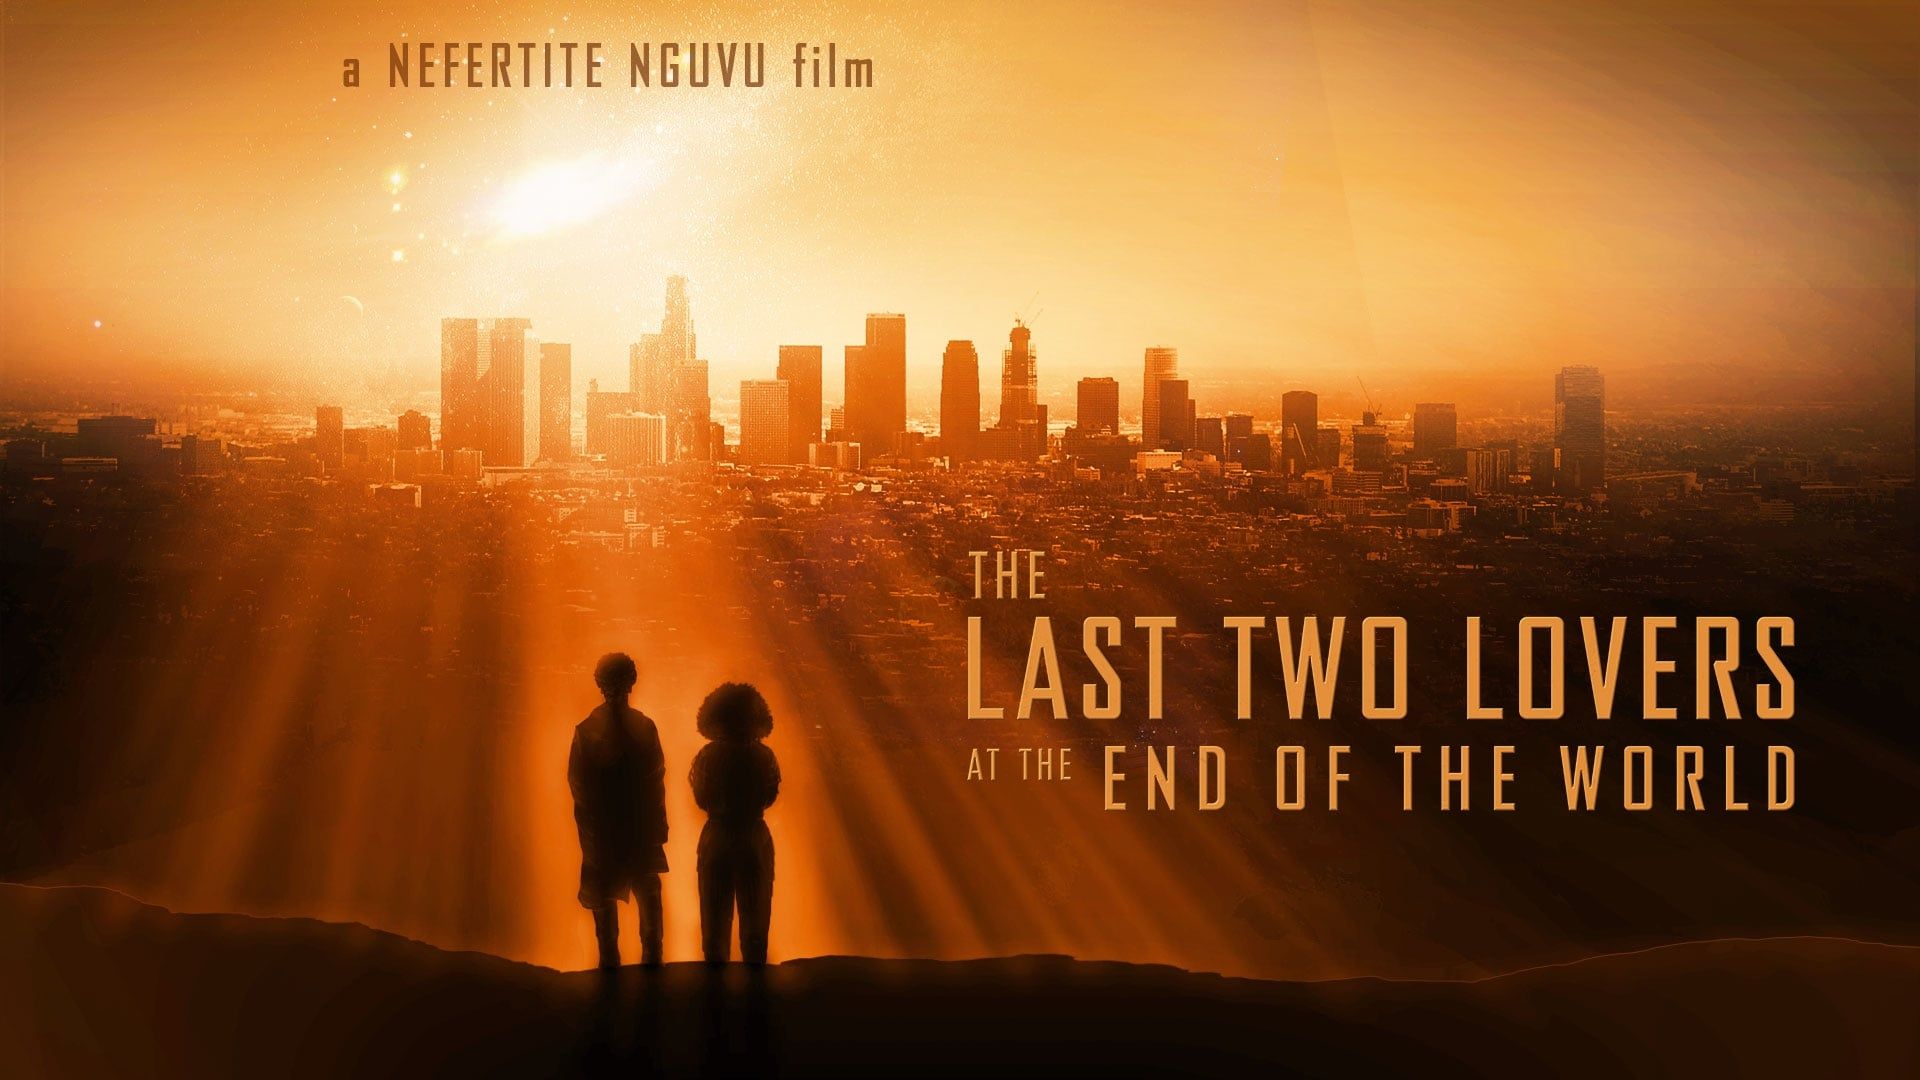 The Last Two Lovers at the End of the World background